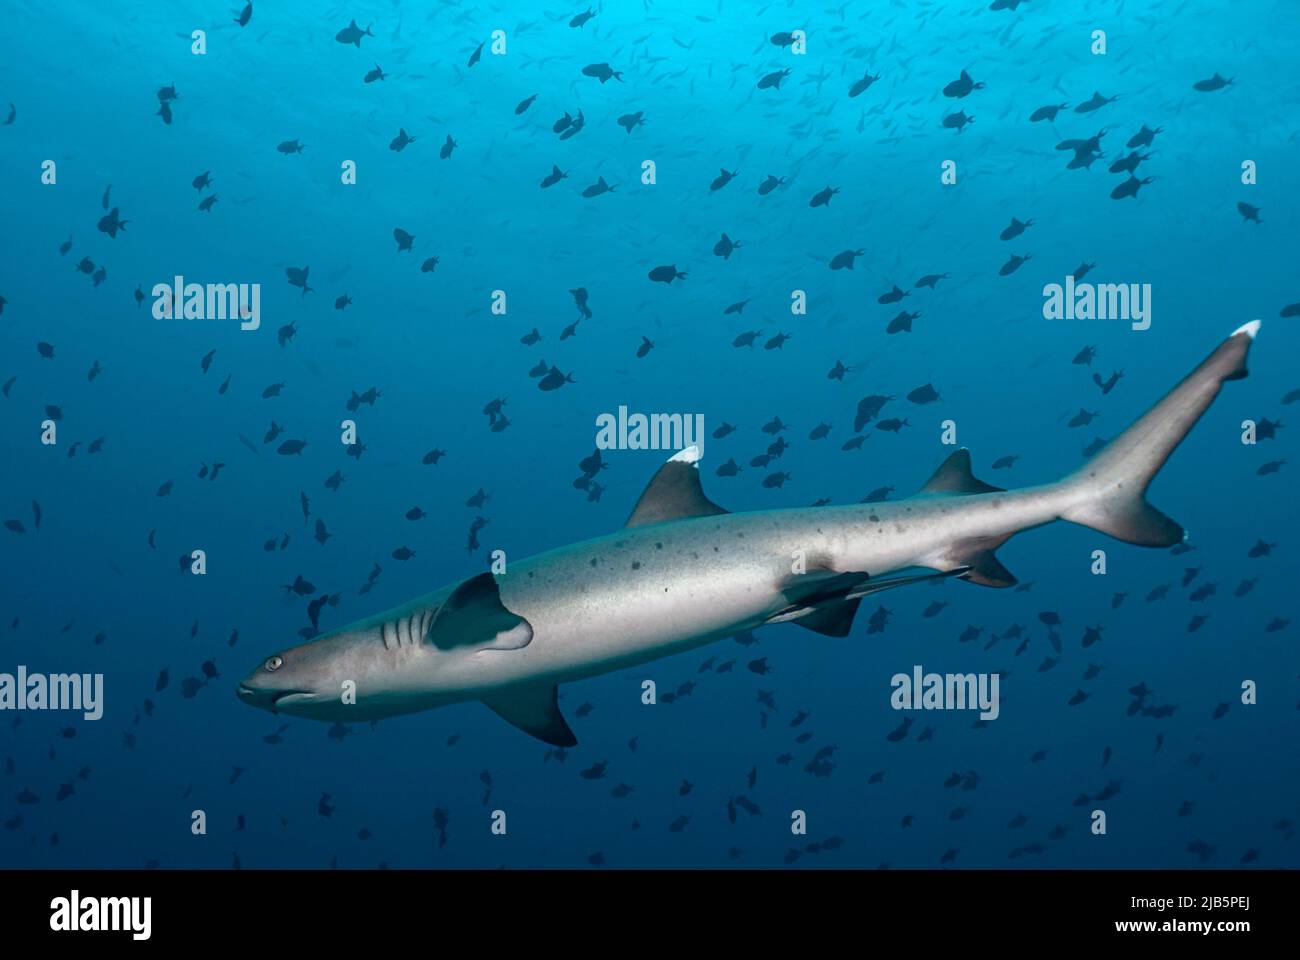 Whitetip reef shark (Triaenodon obesus in the blur, surrounded by a big school of small fishes. Stock Photo